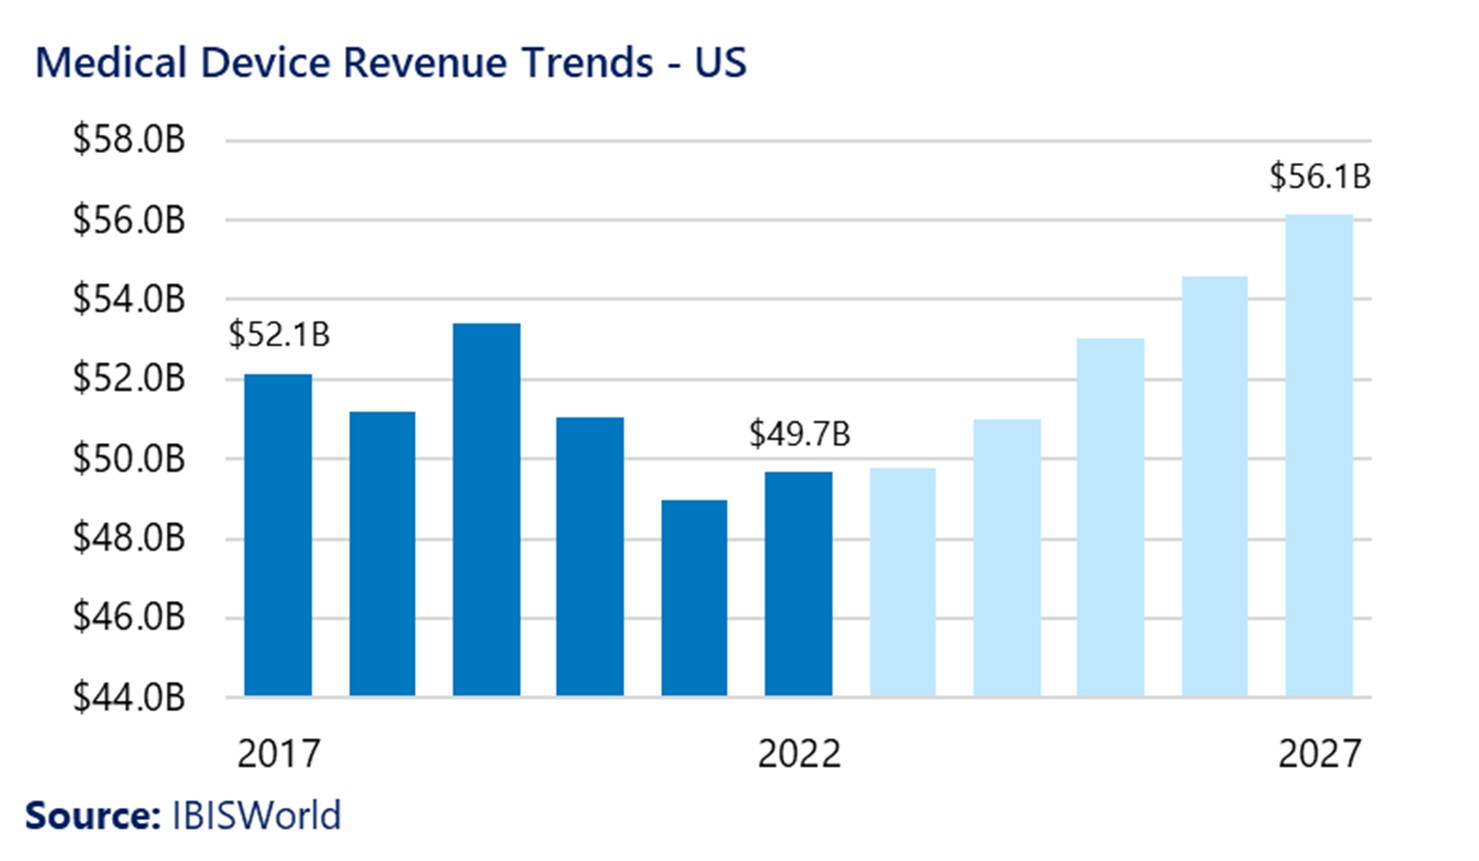 Bar chart showing medical device revenue trends in the US between 2017 and 2027